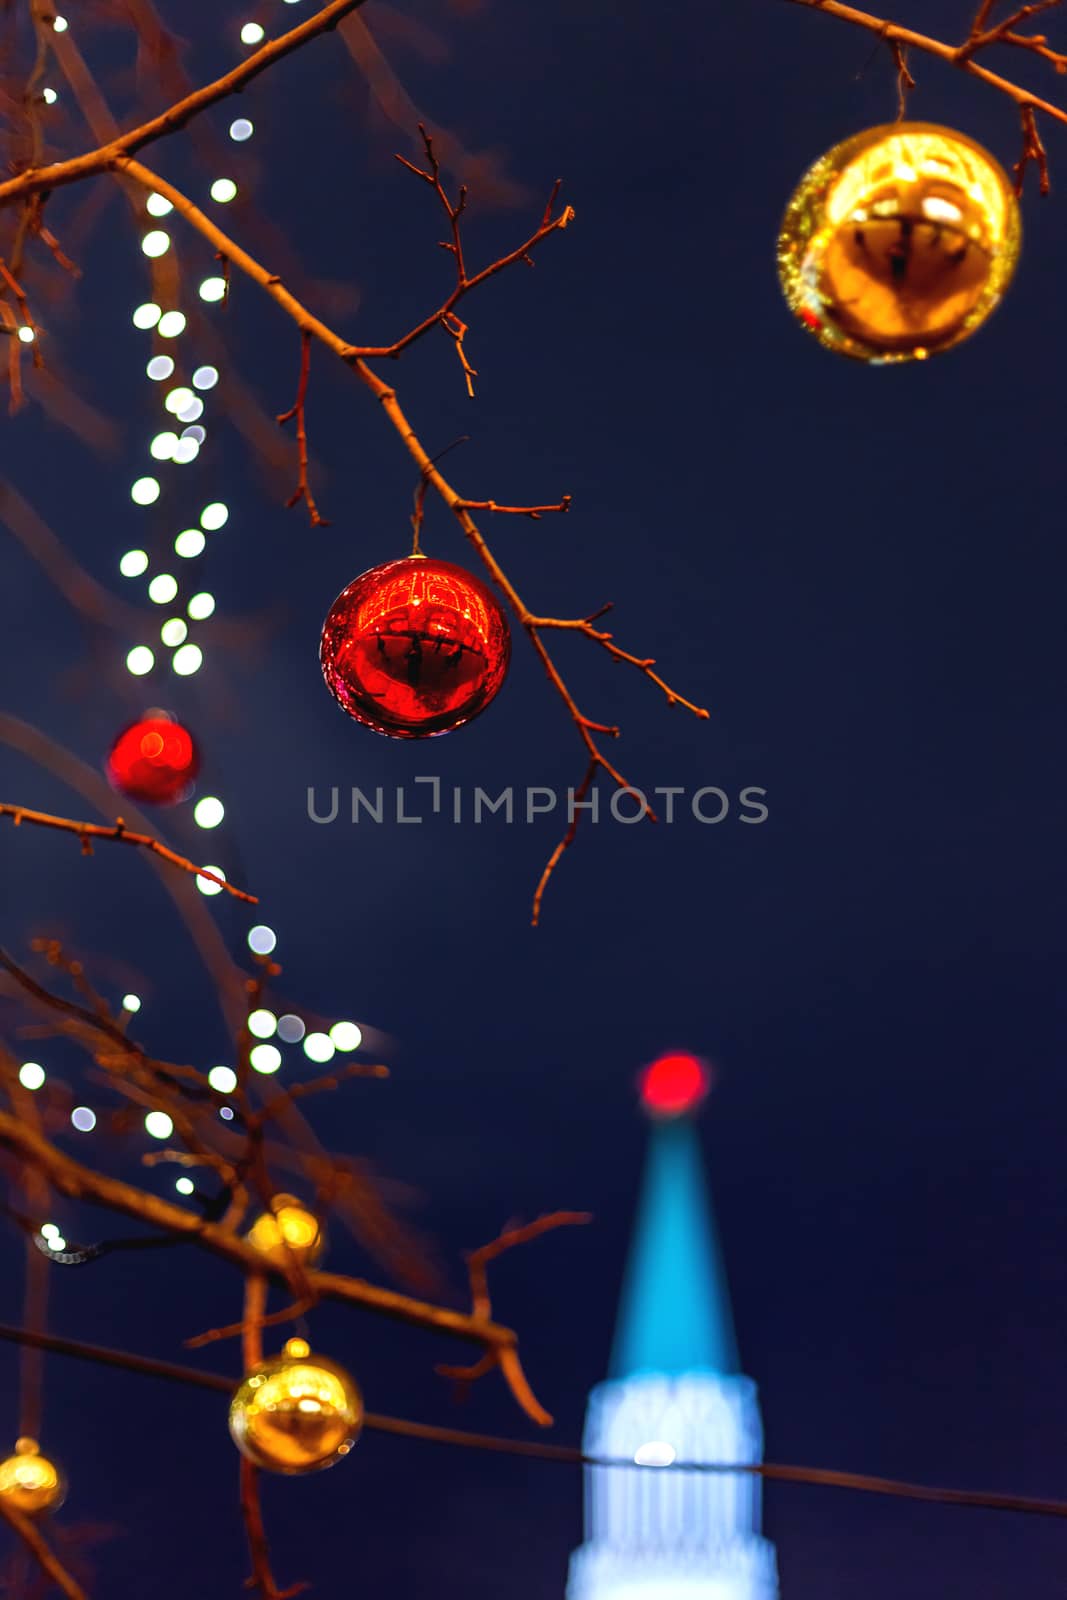 Streets of Moscow decorated for New Year and Christmas celebration. Tree with bright red and yellow balls. The St.Nicholas (Nikolskaya) tower of Kremlin on the background. Russia. by aksenovko